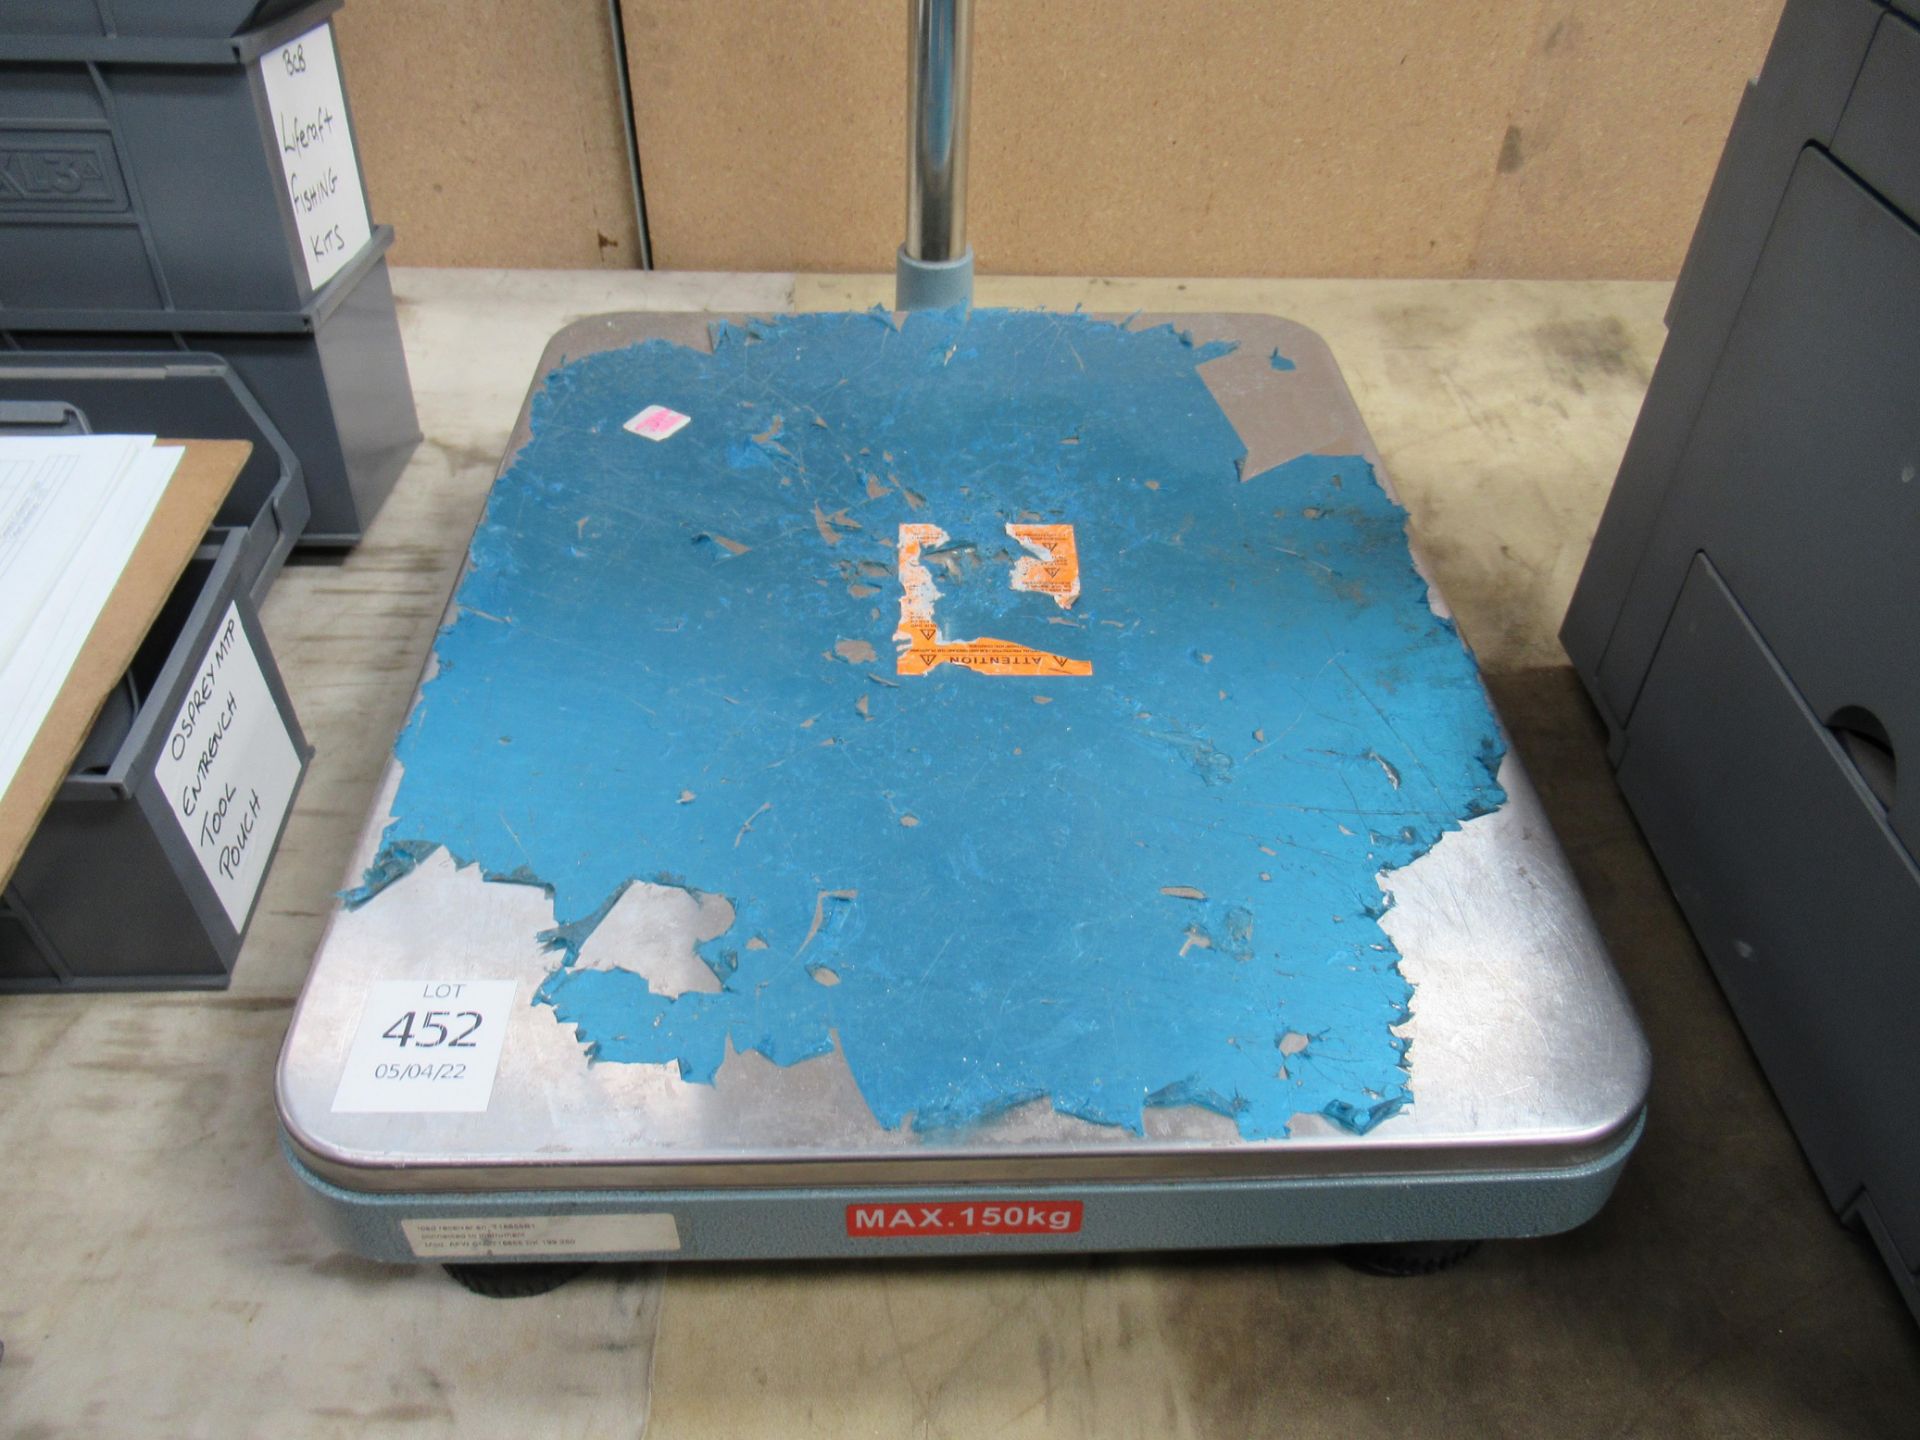 A Scale House Electronic Weighing Scale - Image 2 of 4